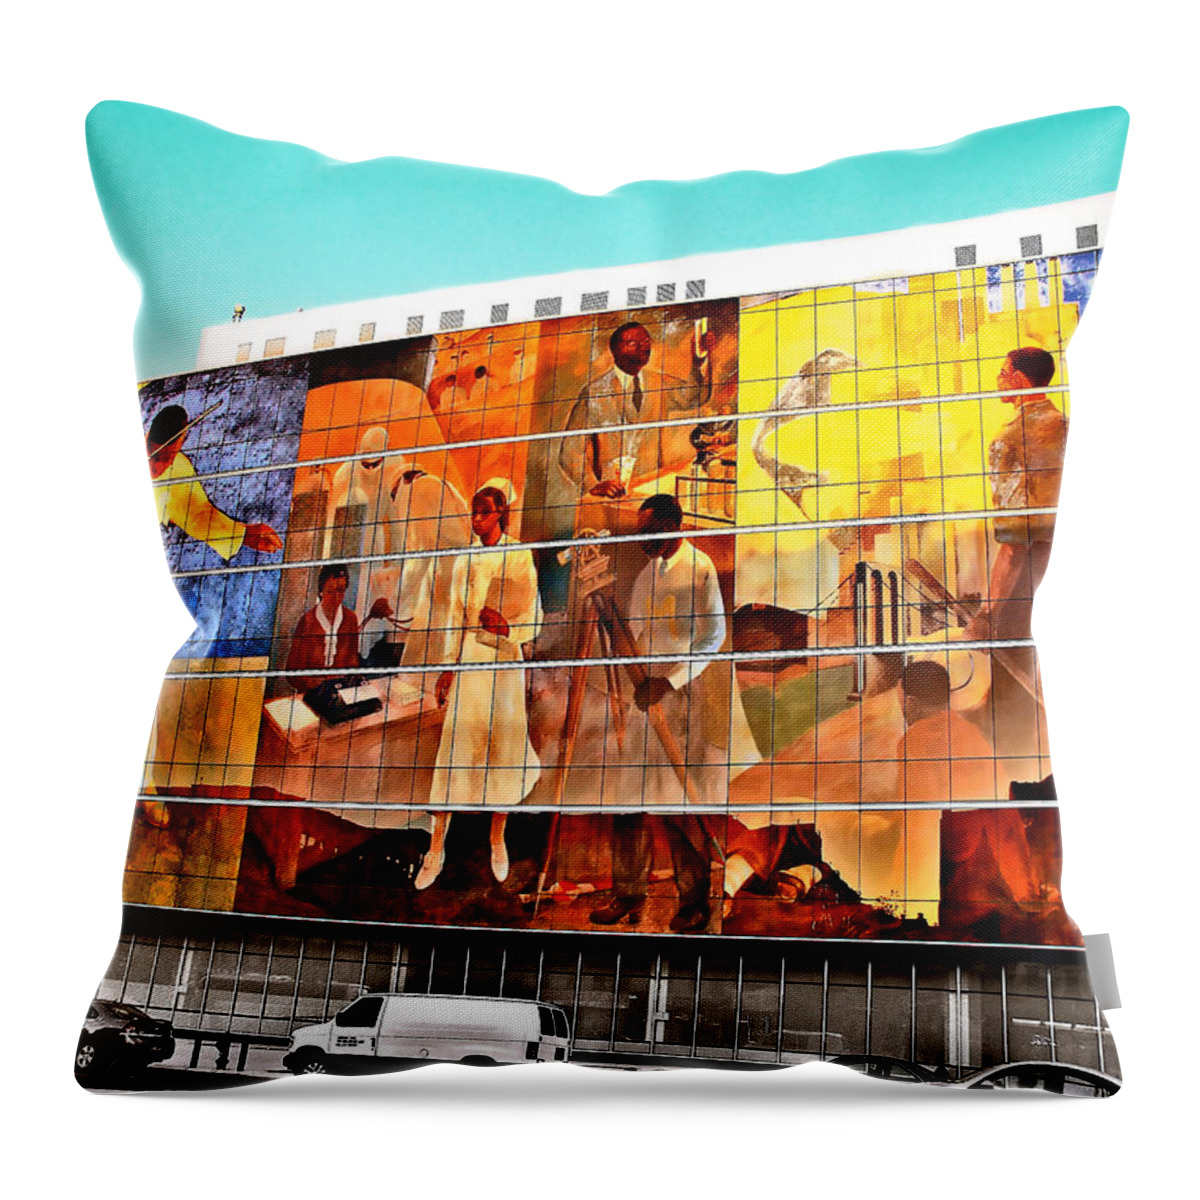 Harlem Throw Pillow featuring the mixed media Harlem Hospital Mural by Terry Wallace